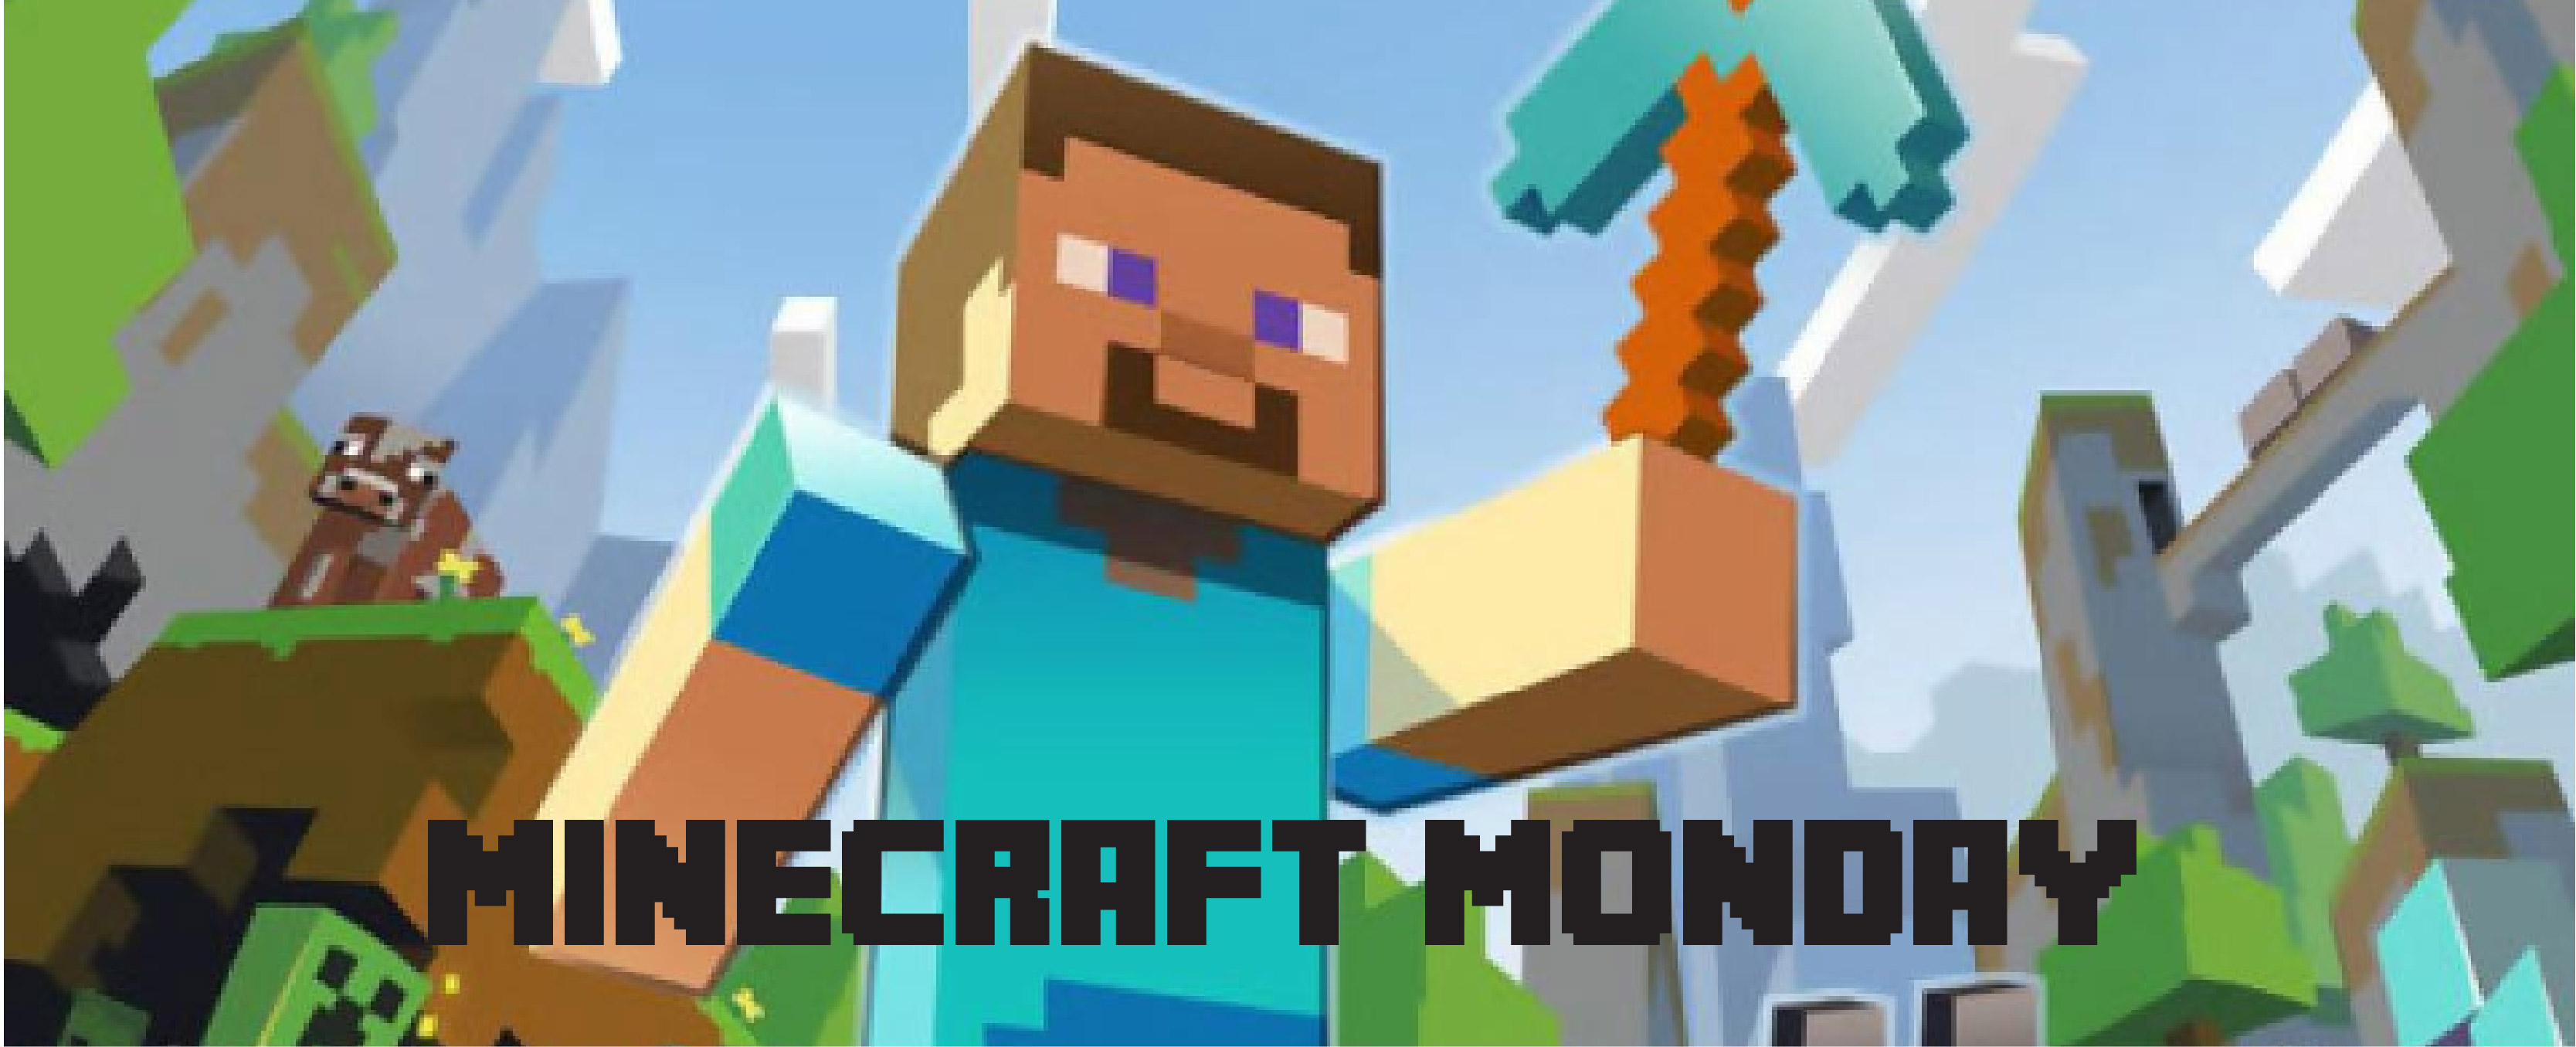 Minecraft videogame character holding a pickax, and text that says "Minecraft Monday"